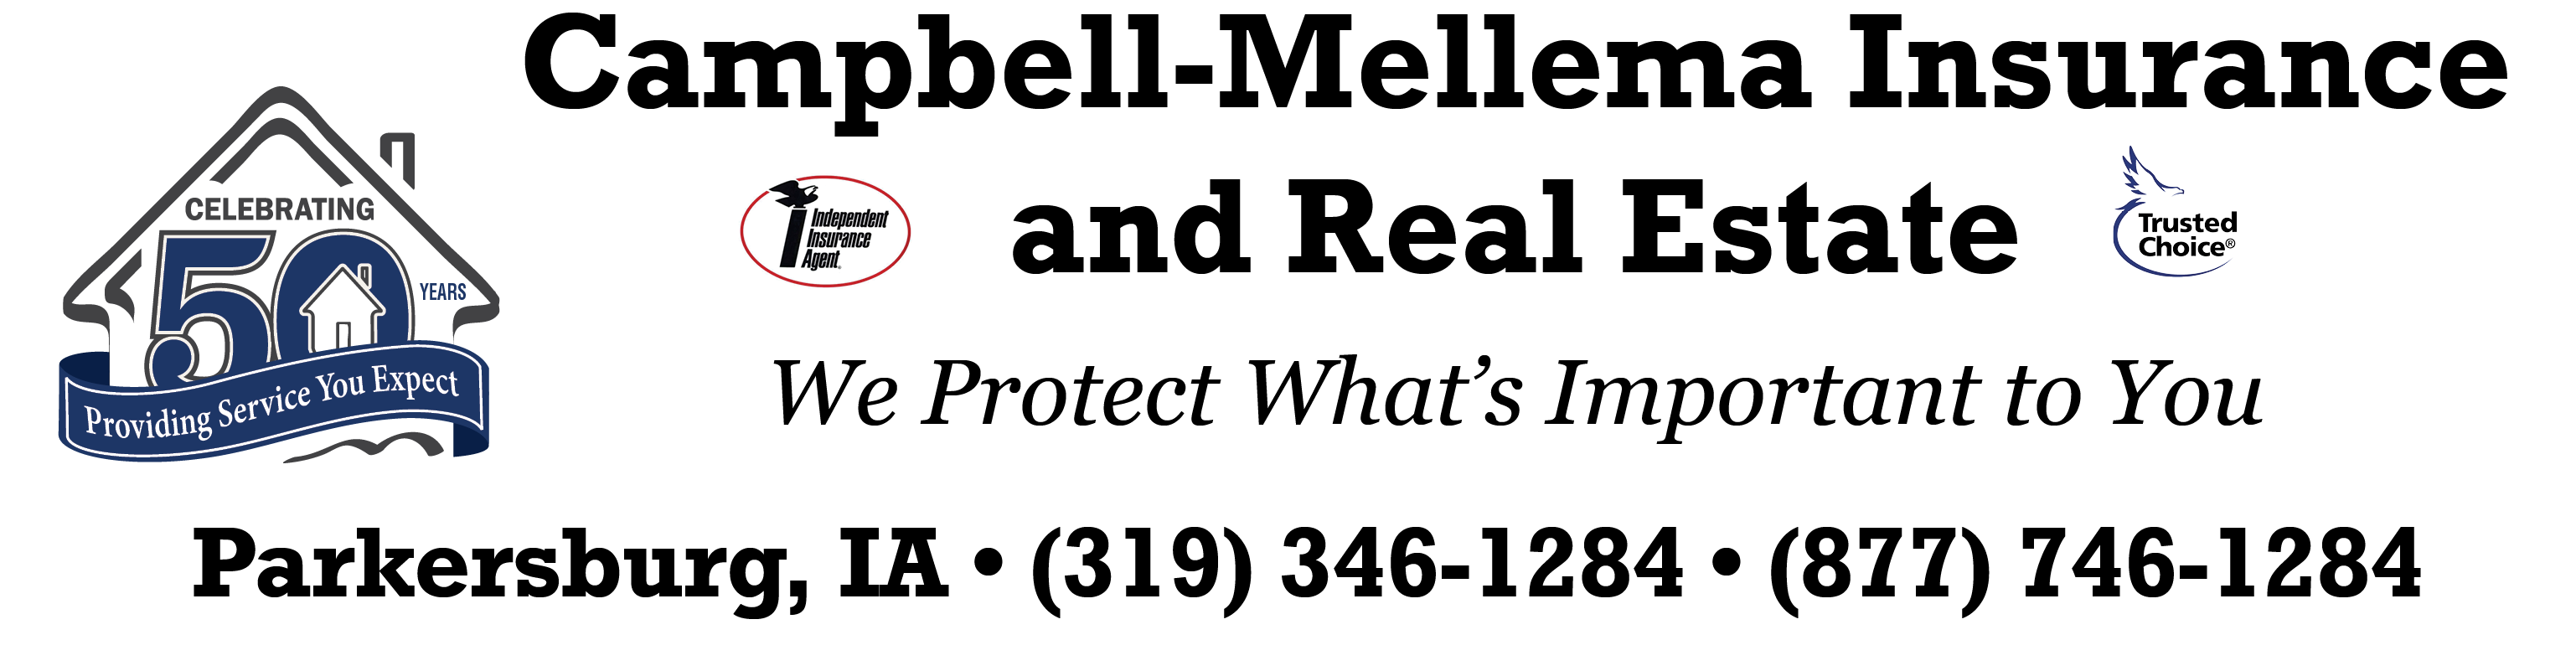 Campbell Mellema Insurance and Real Estate AgencyCampbell Mellema Insurance and Real Estate Agency logo